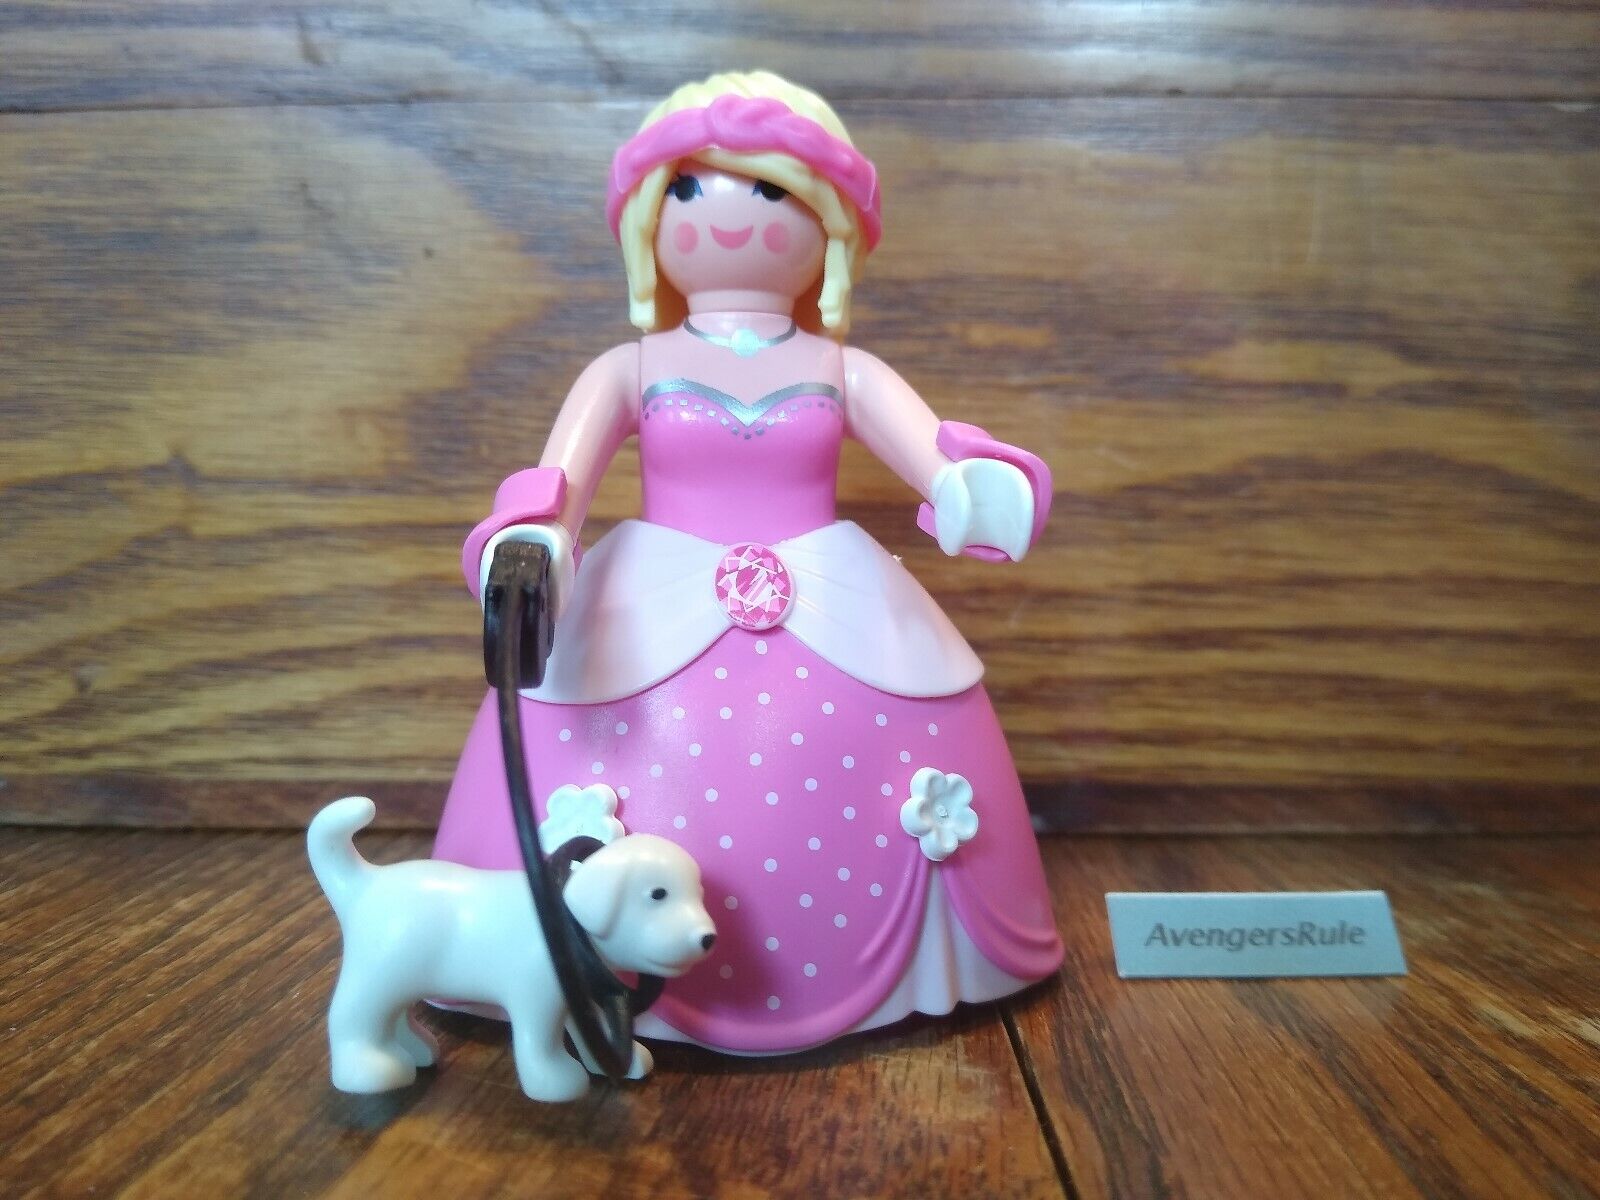 Playmobil Mystery Figures Girls Series 17 Lady with Puppy